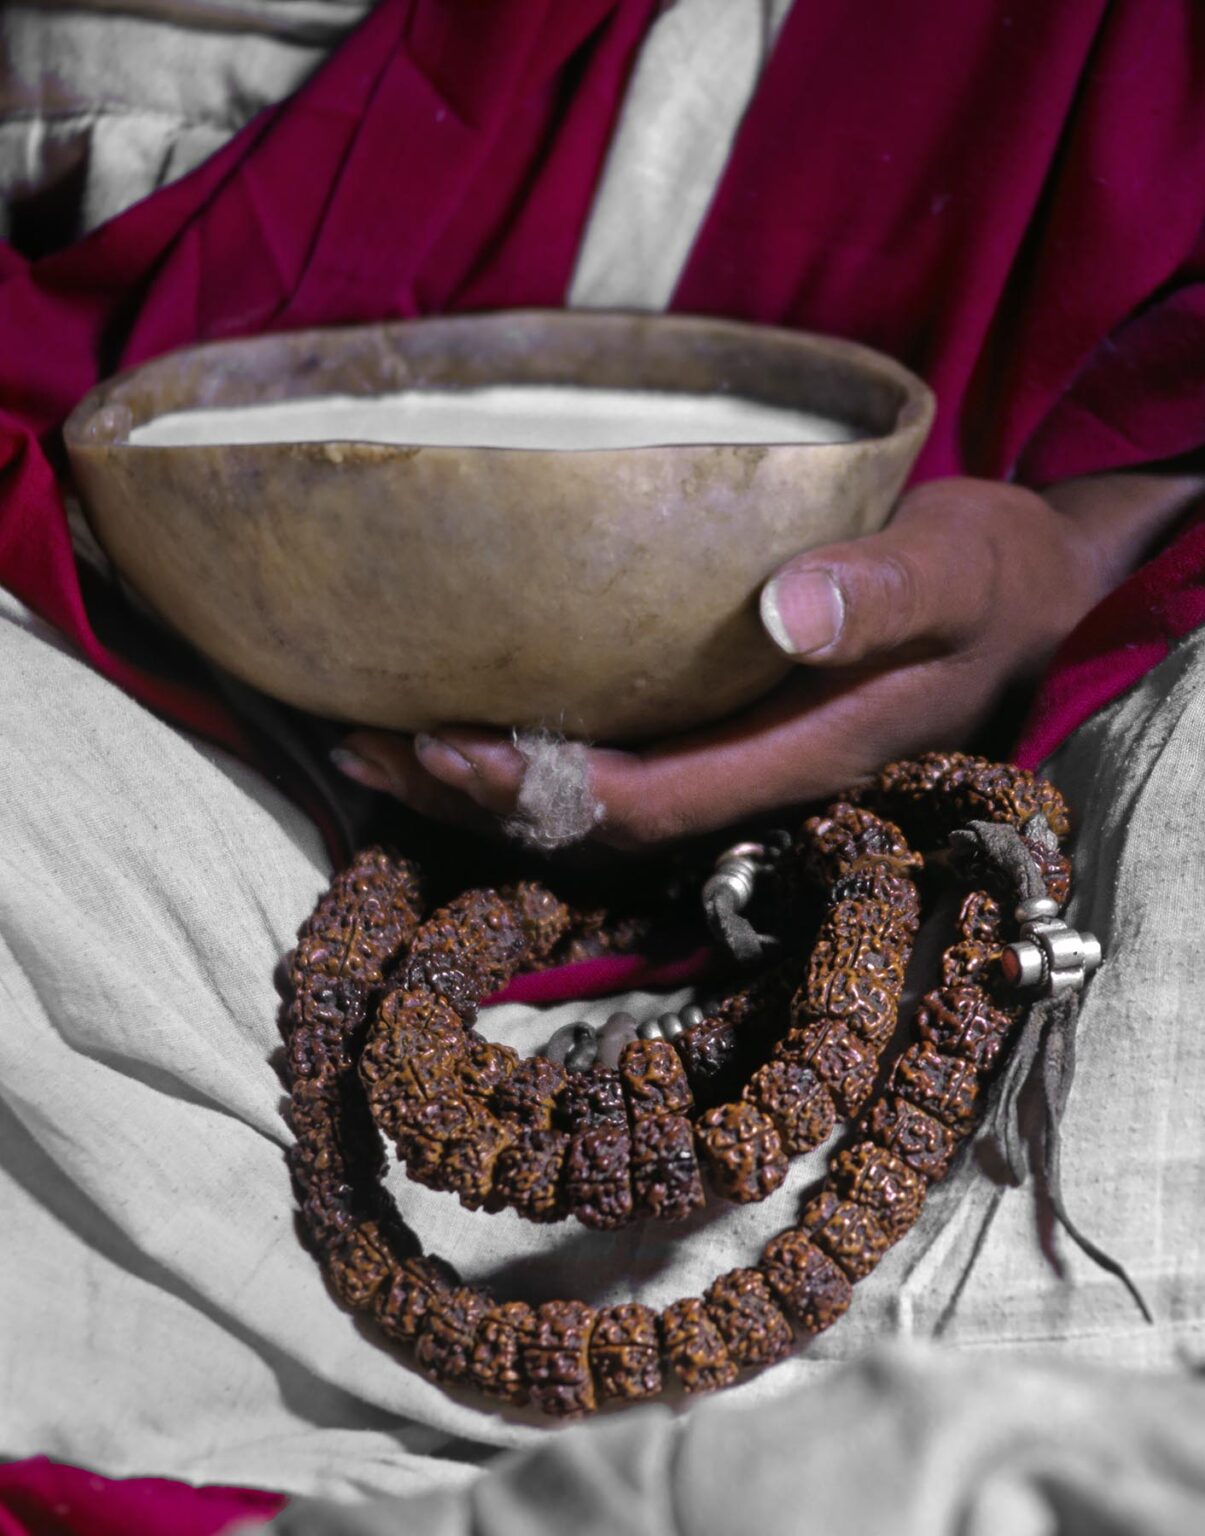 LUNDUP DORJE'S also know as LAMA KHARPO the White Robed Monk SCULL CUP & MALA - TERDROM in CENTRAL TIBET